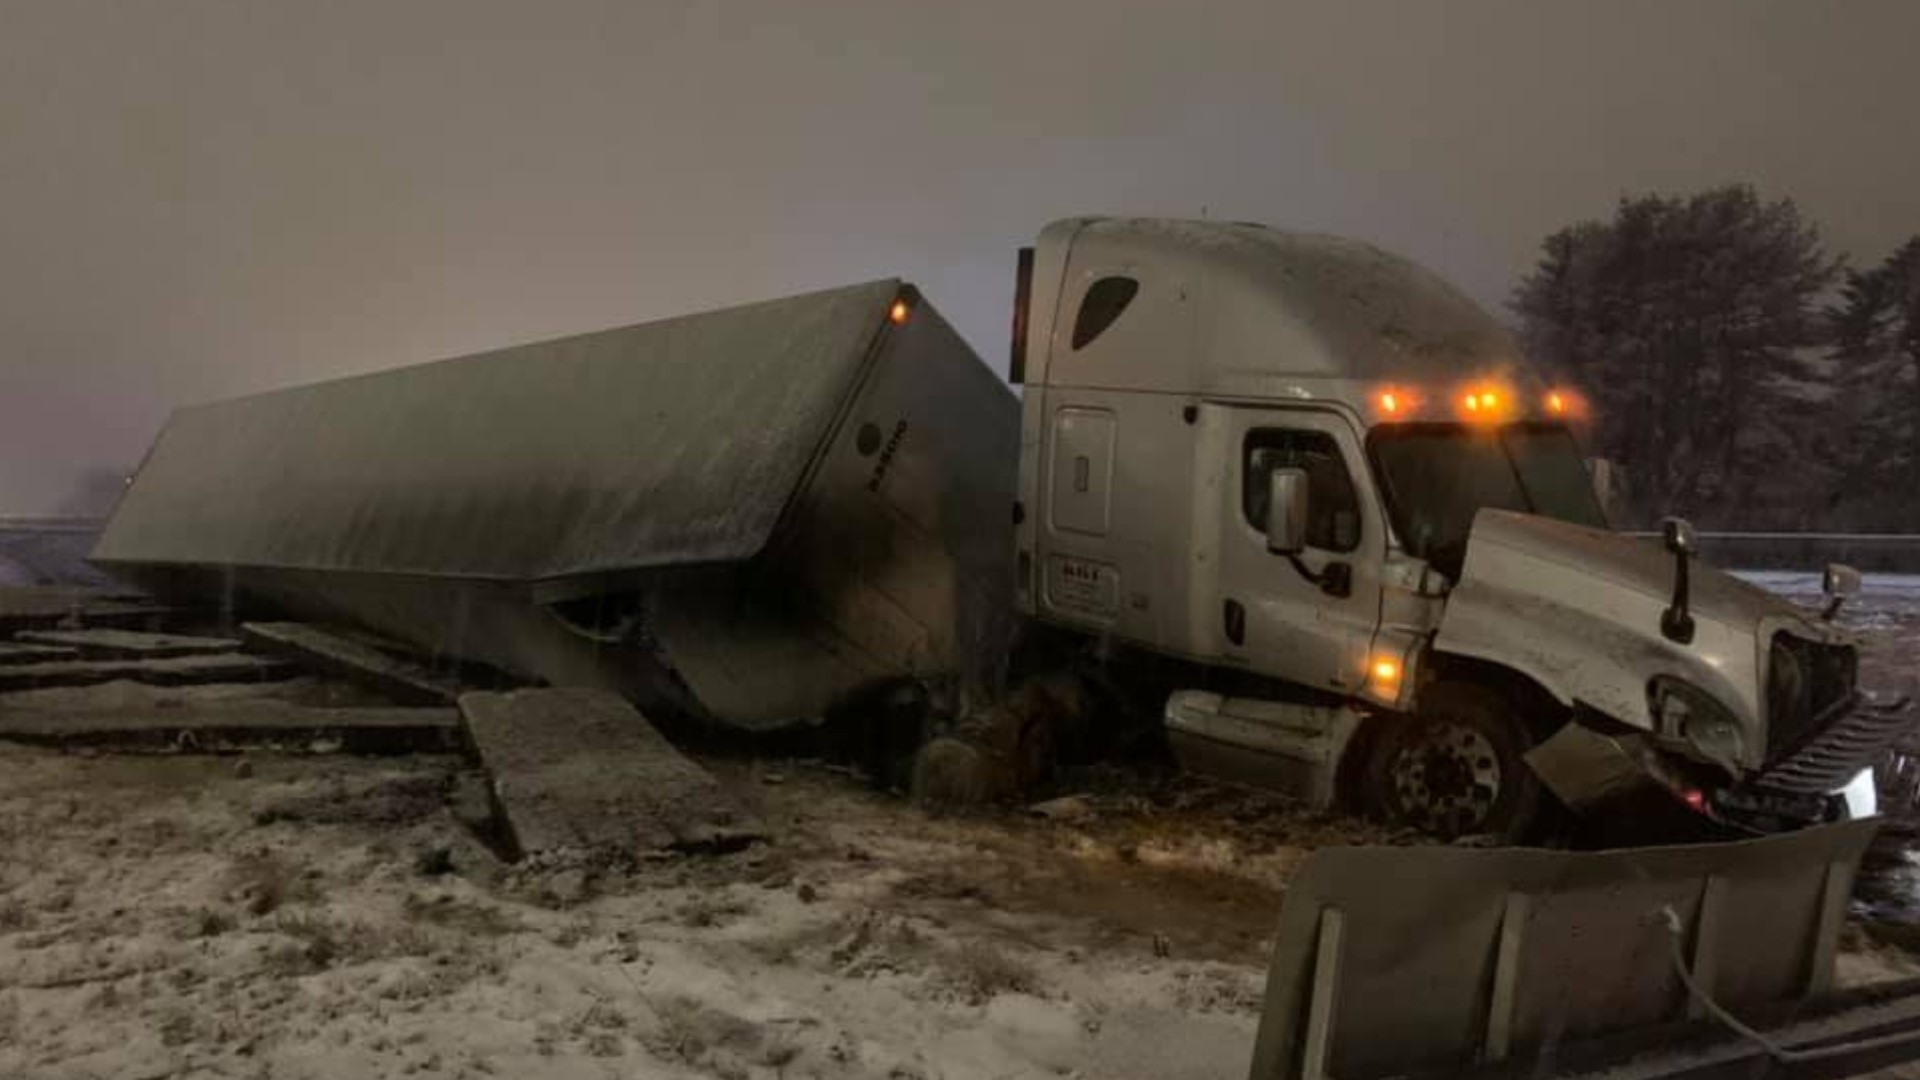 The tractor trailer truck went of I-95 near mm45 in South Portland.